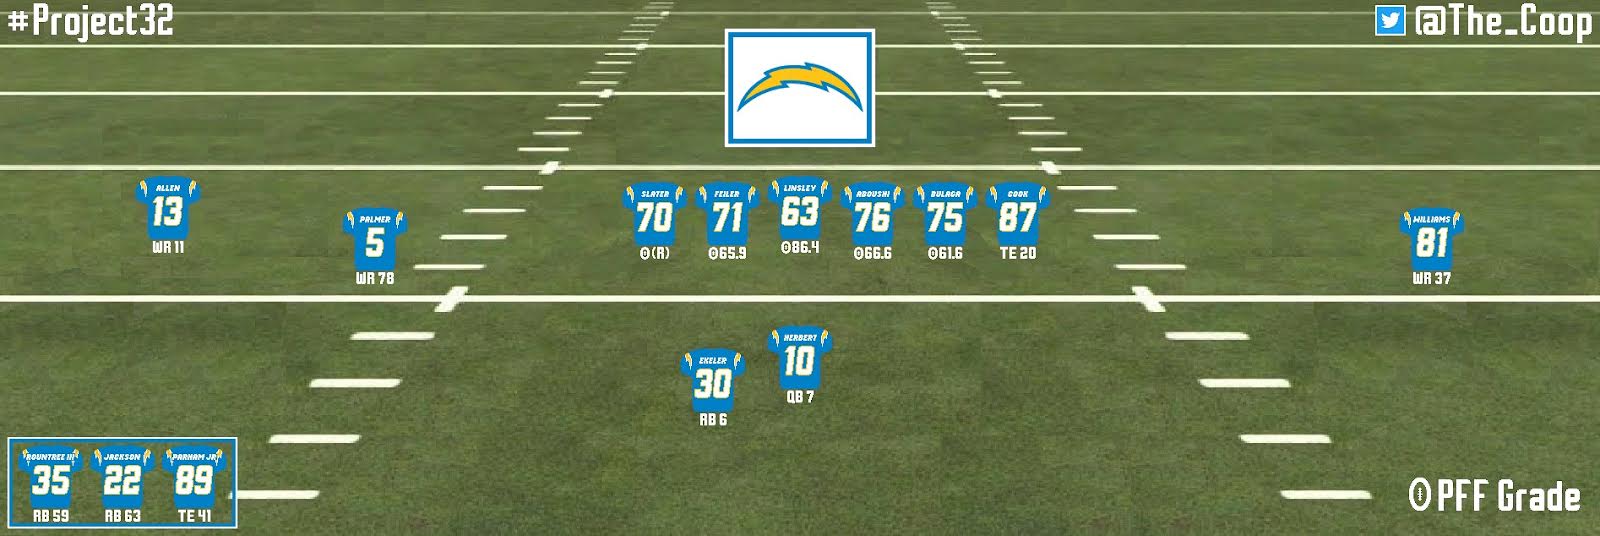 Los Angeles Chargers 2021 projections